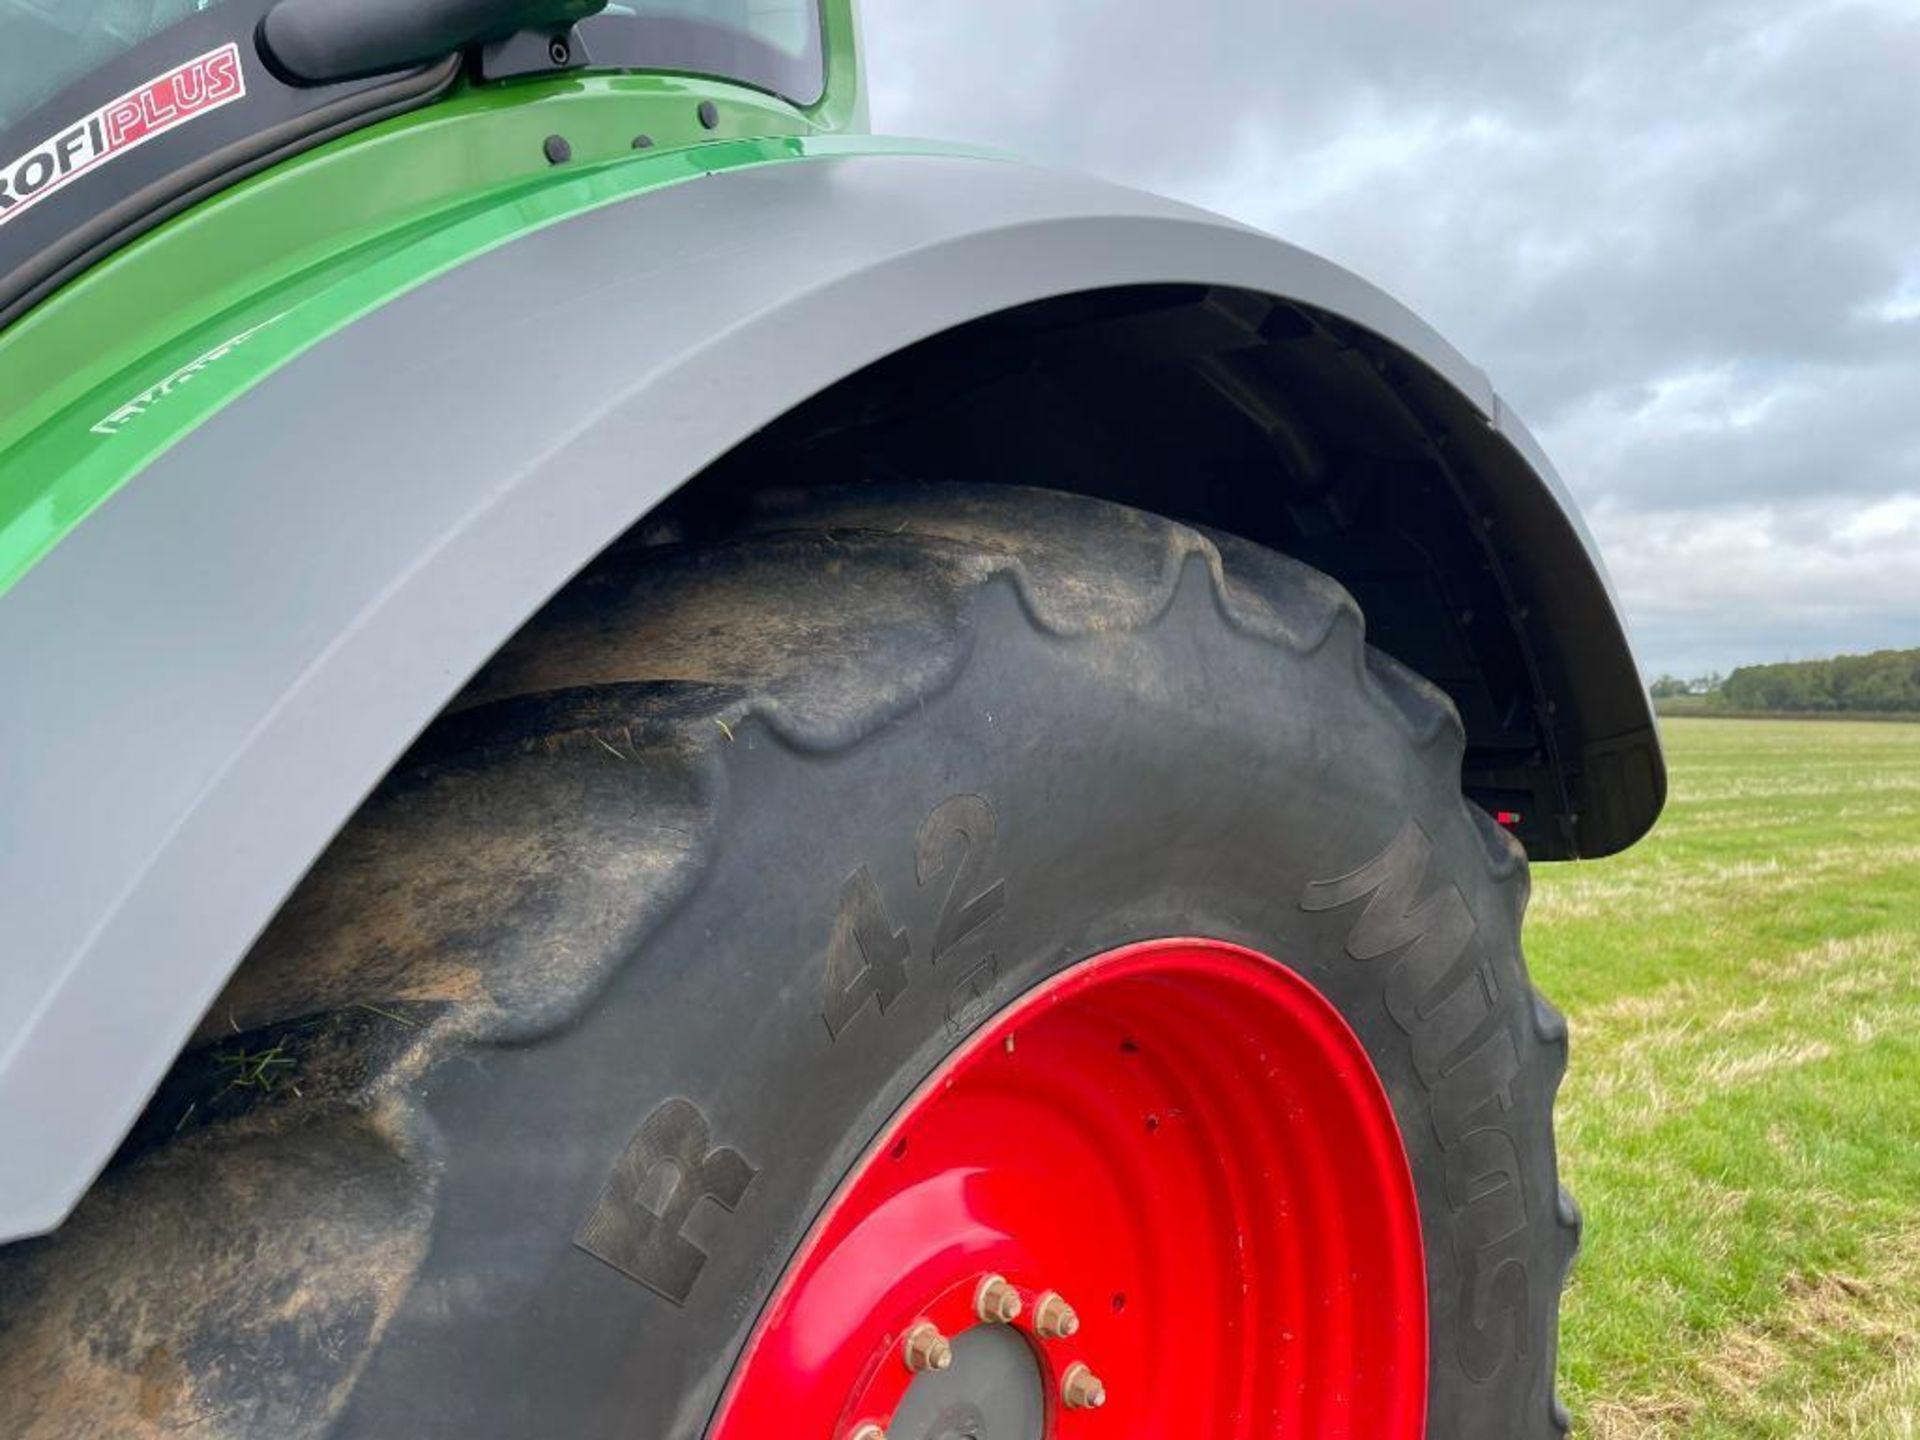 2018 Fendt 828 Vario Profi Plus 65kph 4wd tractor with Quicke Q8M front loader and pallet tines, fro - Image 17 of 29